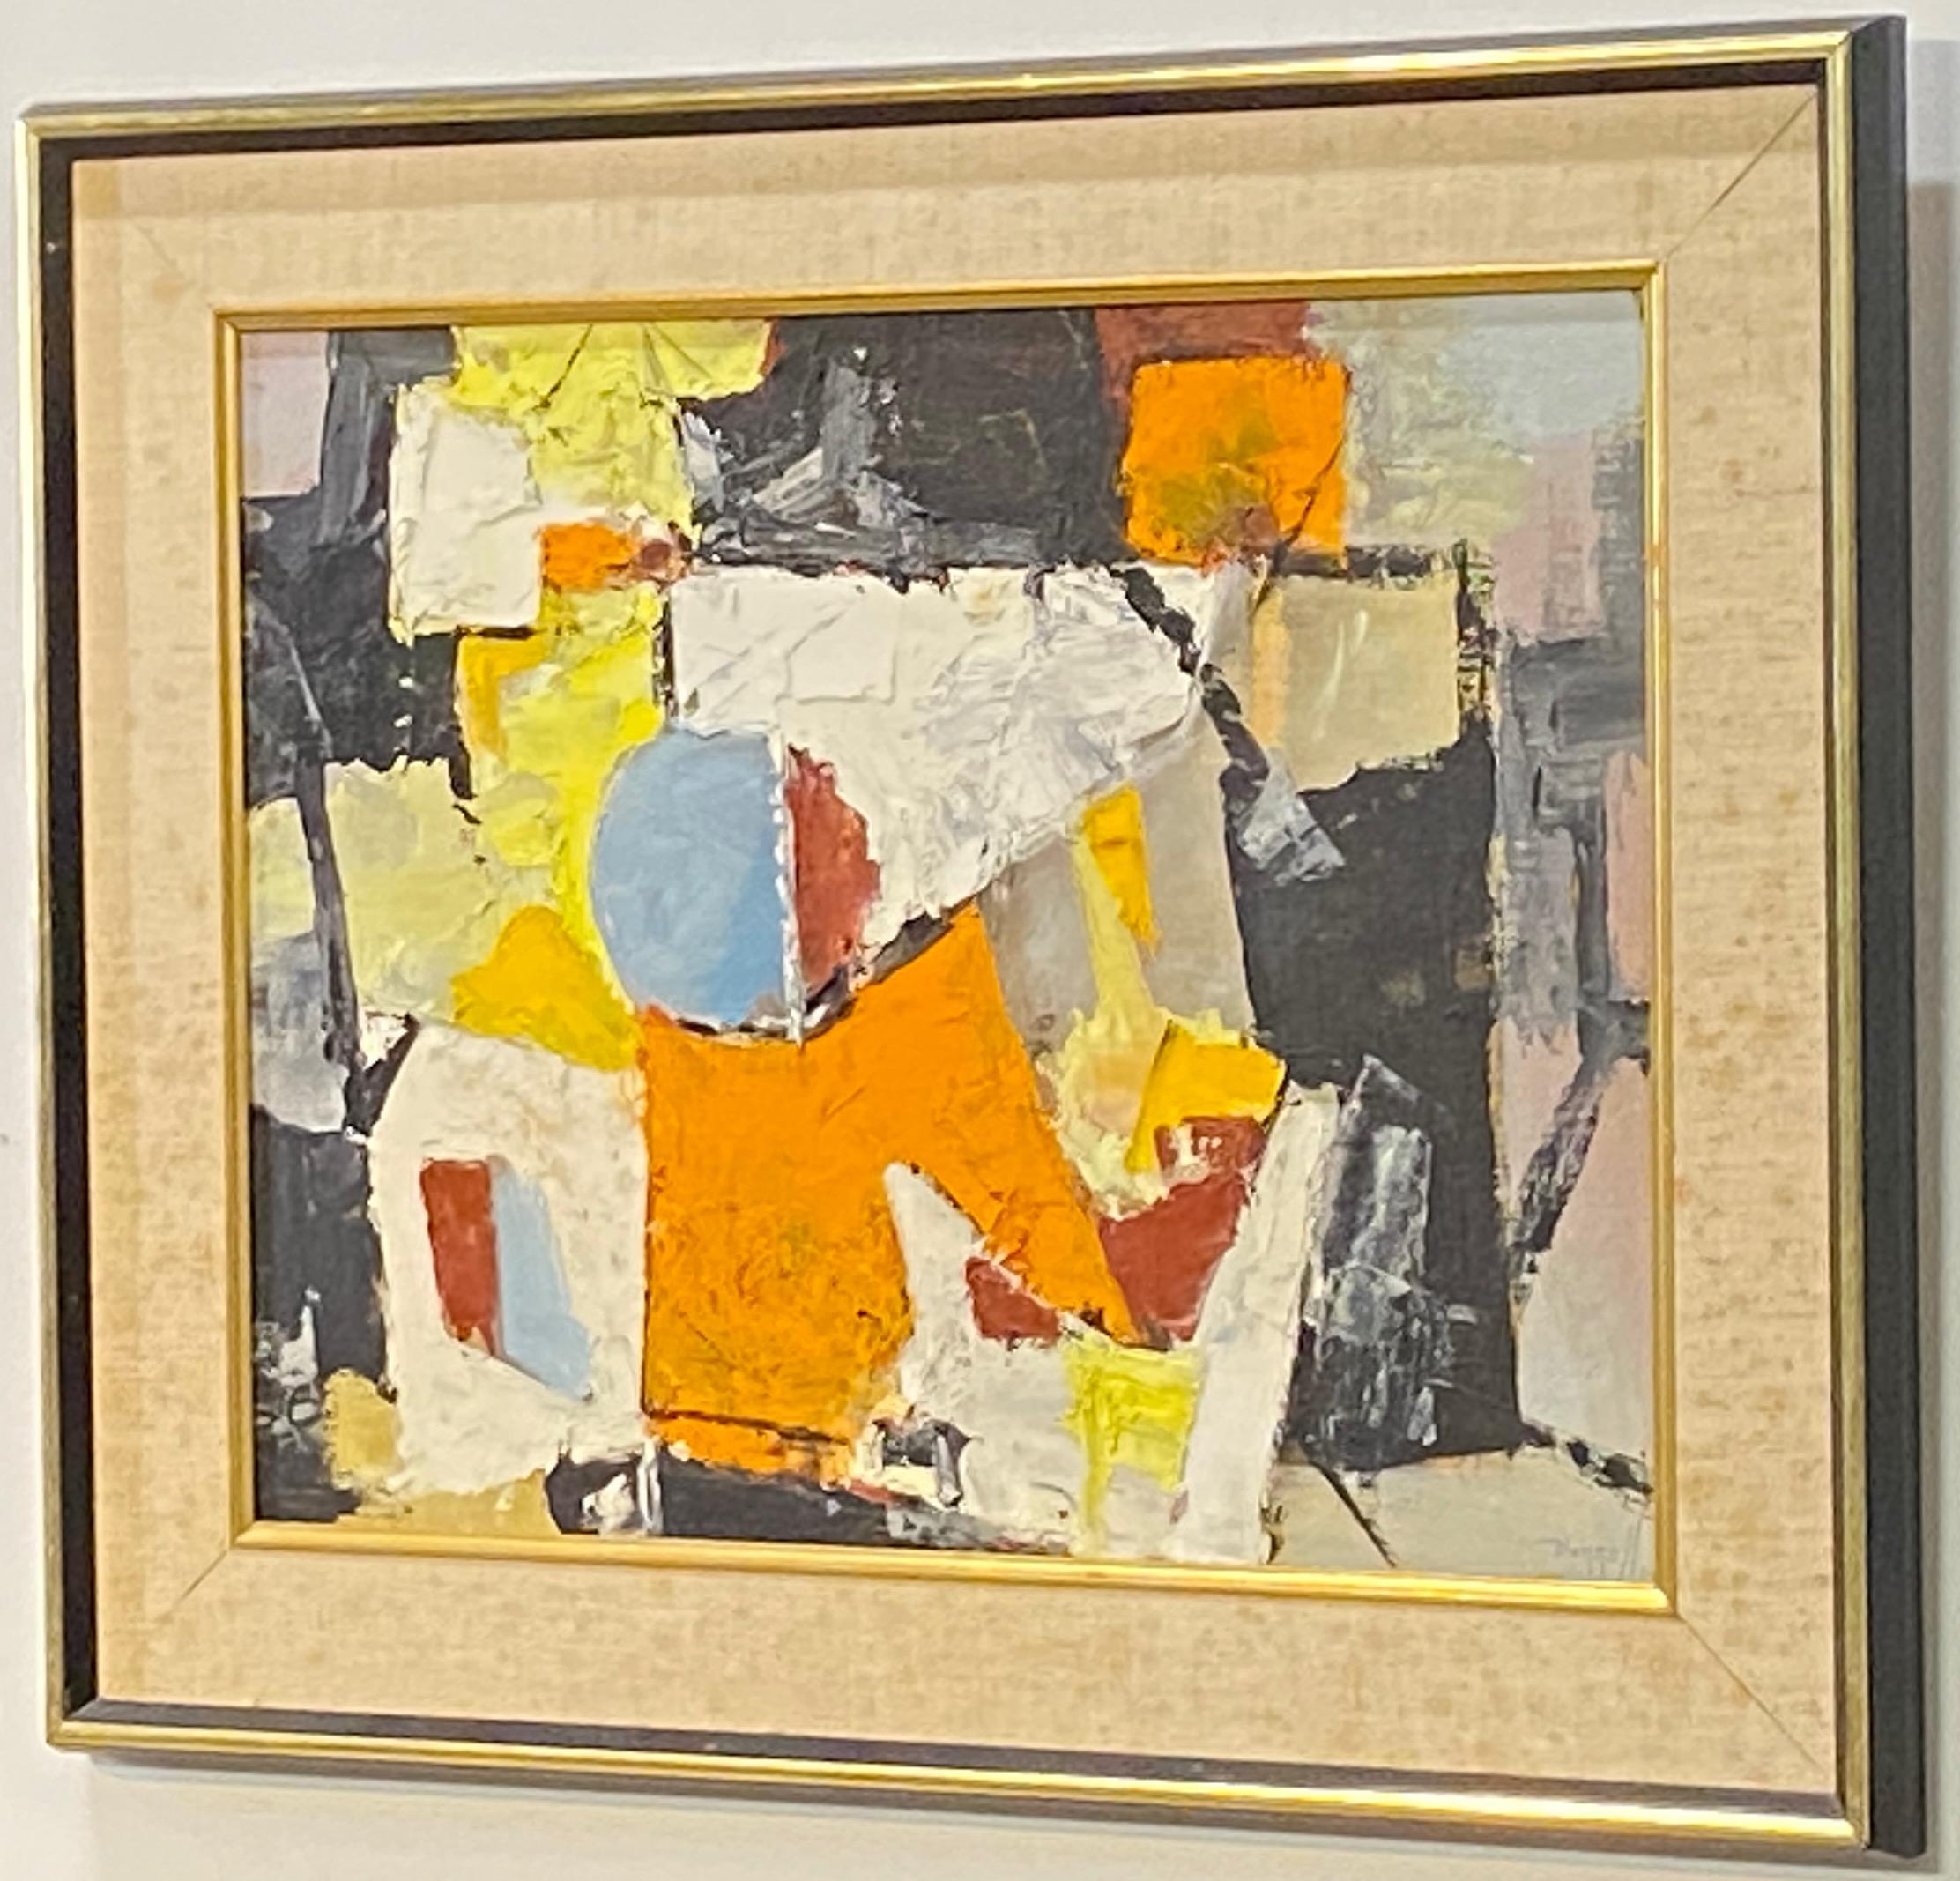 American Mid-Century Modernist Abstract Painting by Charles Ragland Bunnell 1959 For Sale